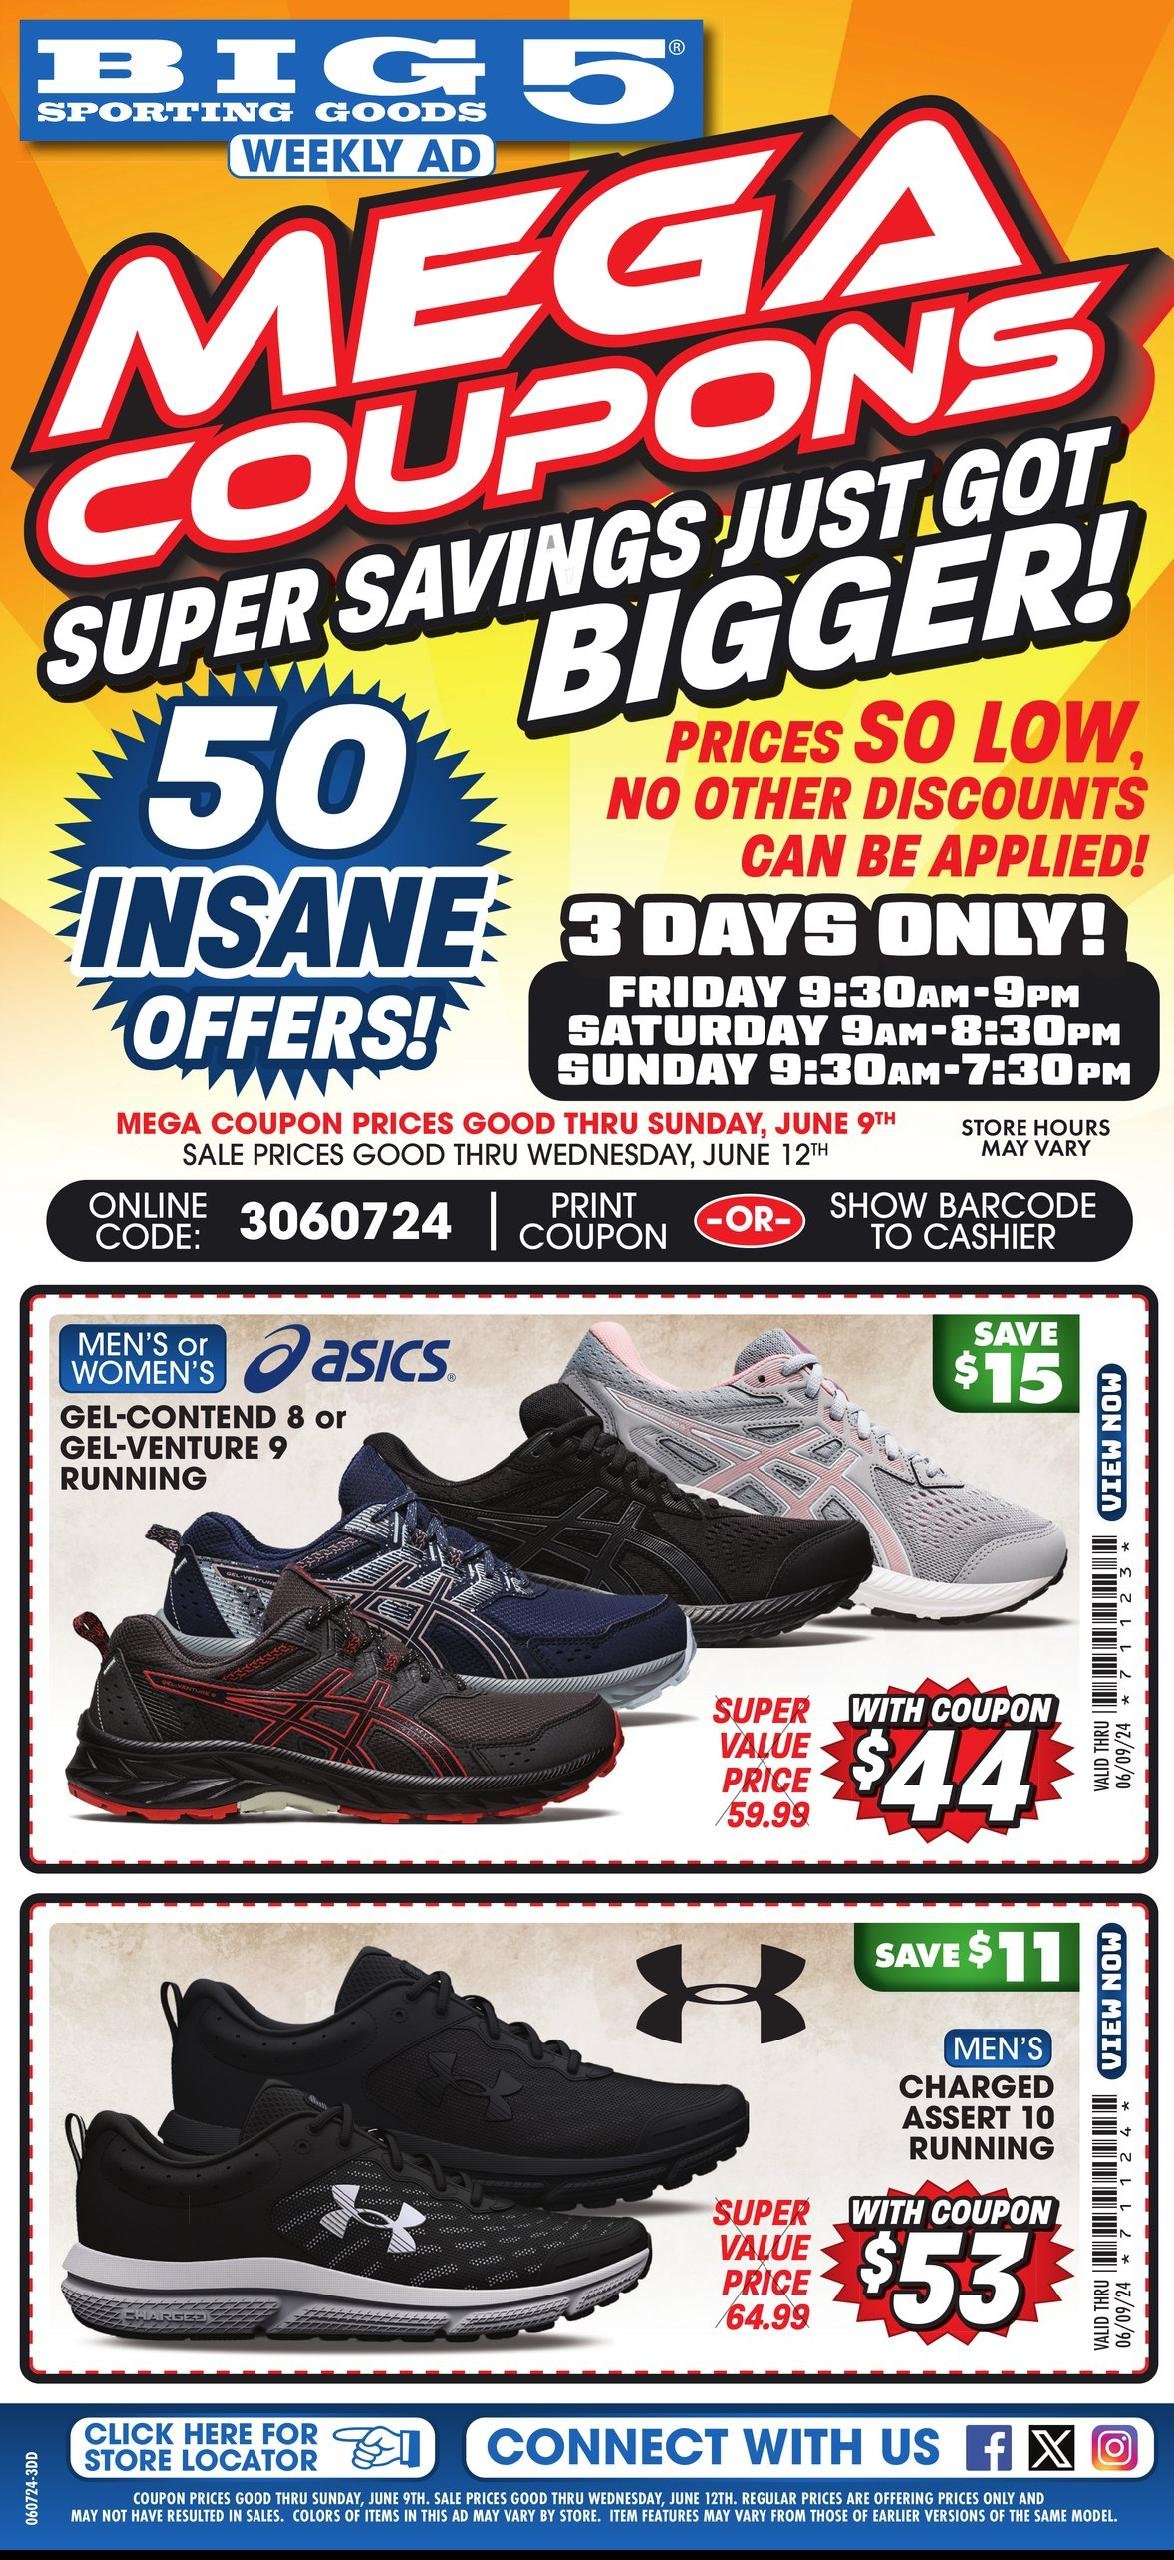 Big 5 Sporting Goods weekly ad - page 1